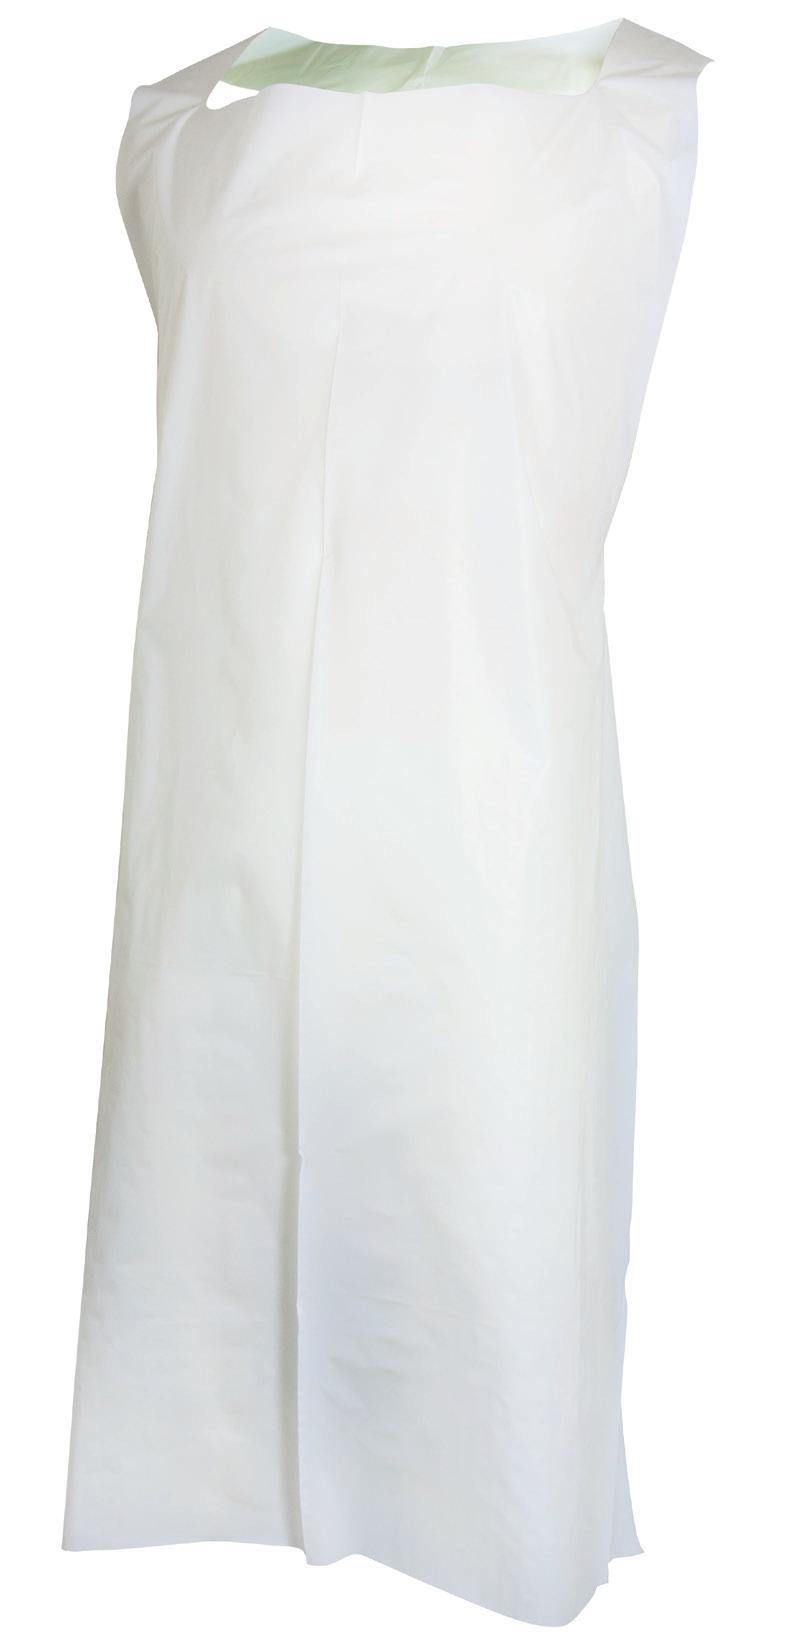 Aprons Our general purpose aprons are appropriate for a wide range of uses, for both the patient and physician.